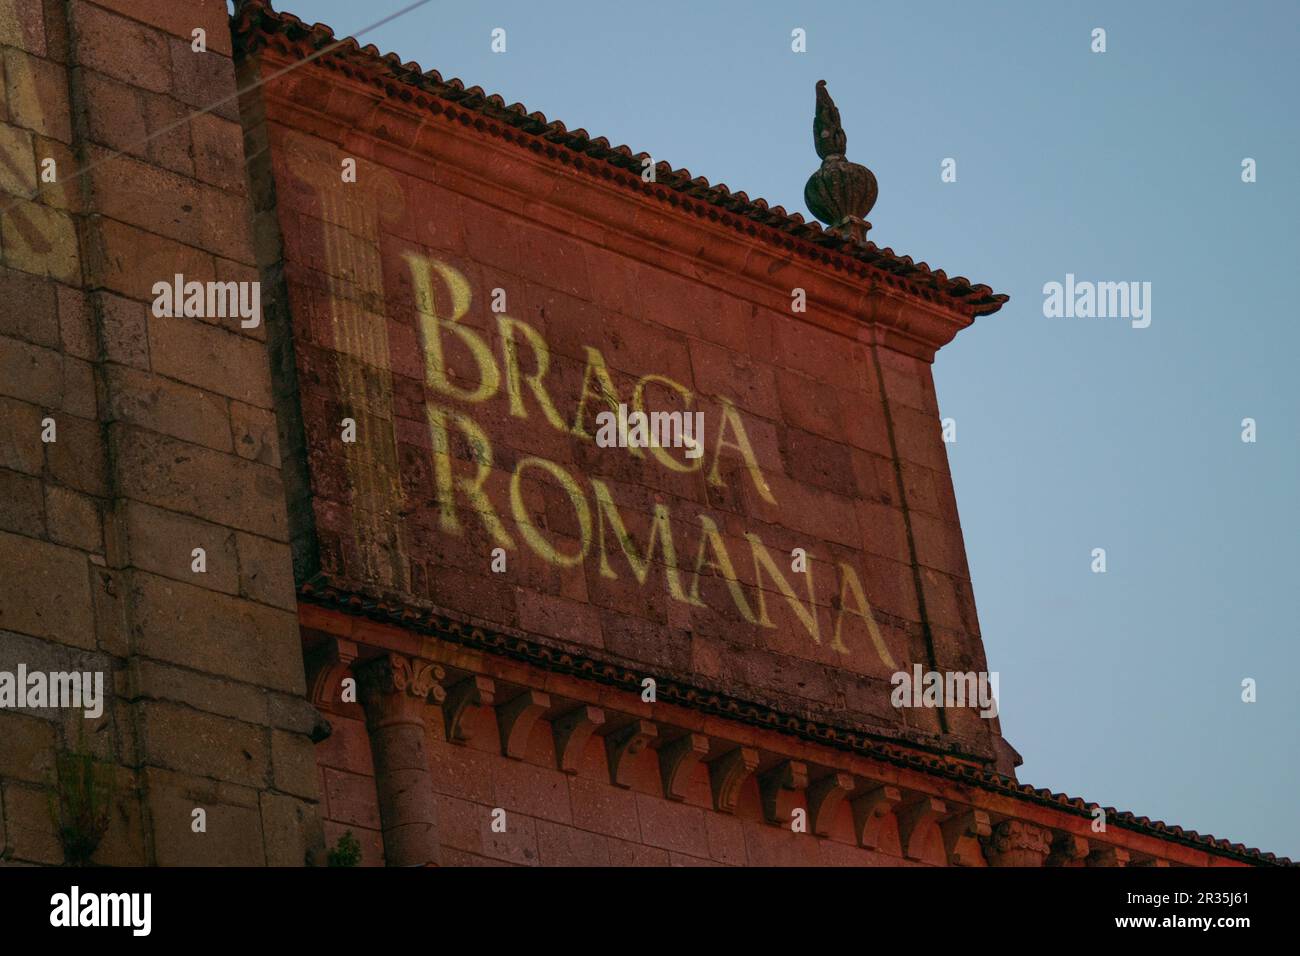 Braga Romana social and cultural event in North Portugal. Lights projection of logos or brands. Stock Photo